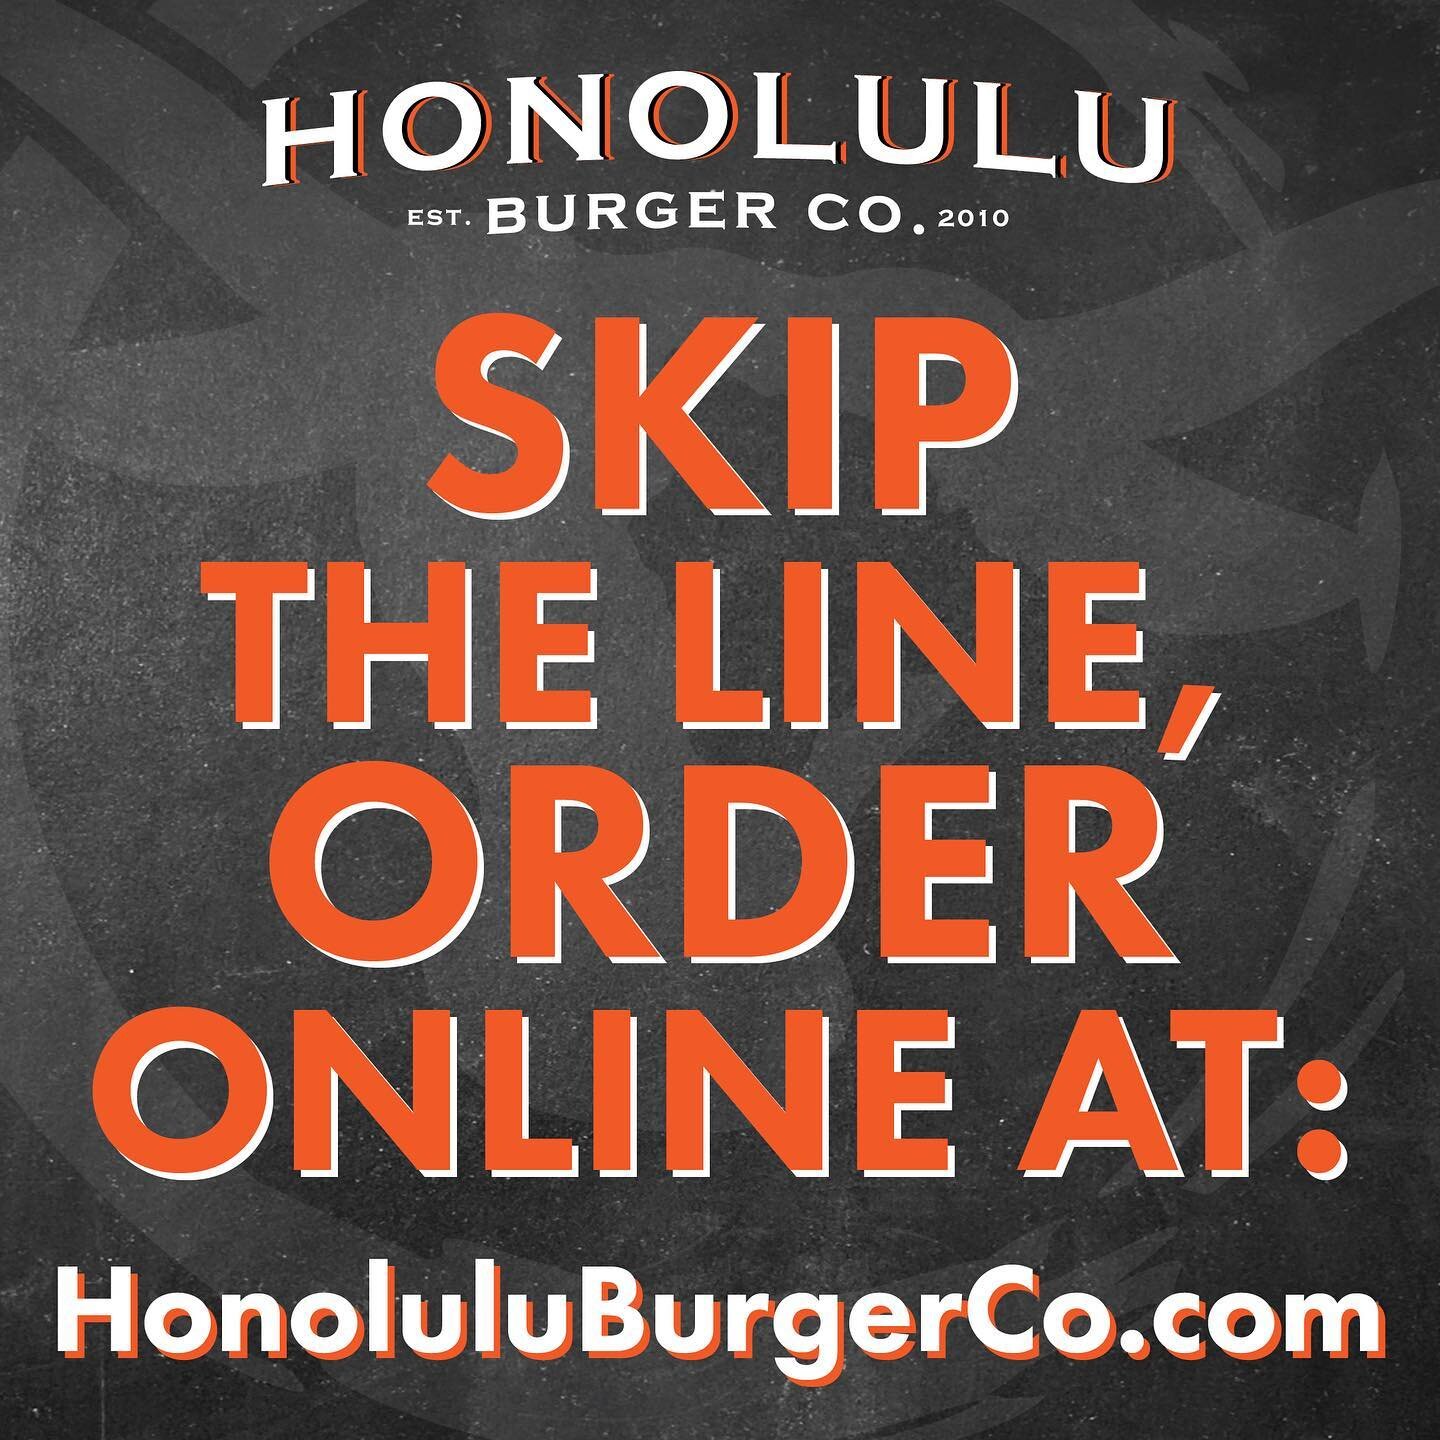 Amidst all the shopping, skip our lines and order your meal ahead of time! 🍔🍟🥤 
-
#bestburger #grassfedbeef #bigislandbeef #beef #burger #burgerlife #burgers #hamburger #cheeseburger #localingredients #honoluluburgerco #oahu #kaimuki #waialae